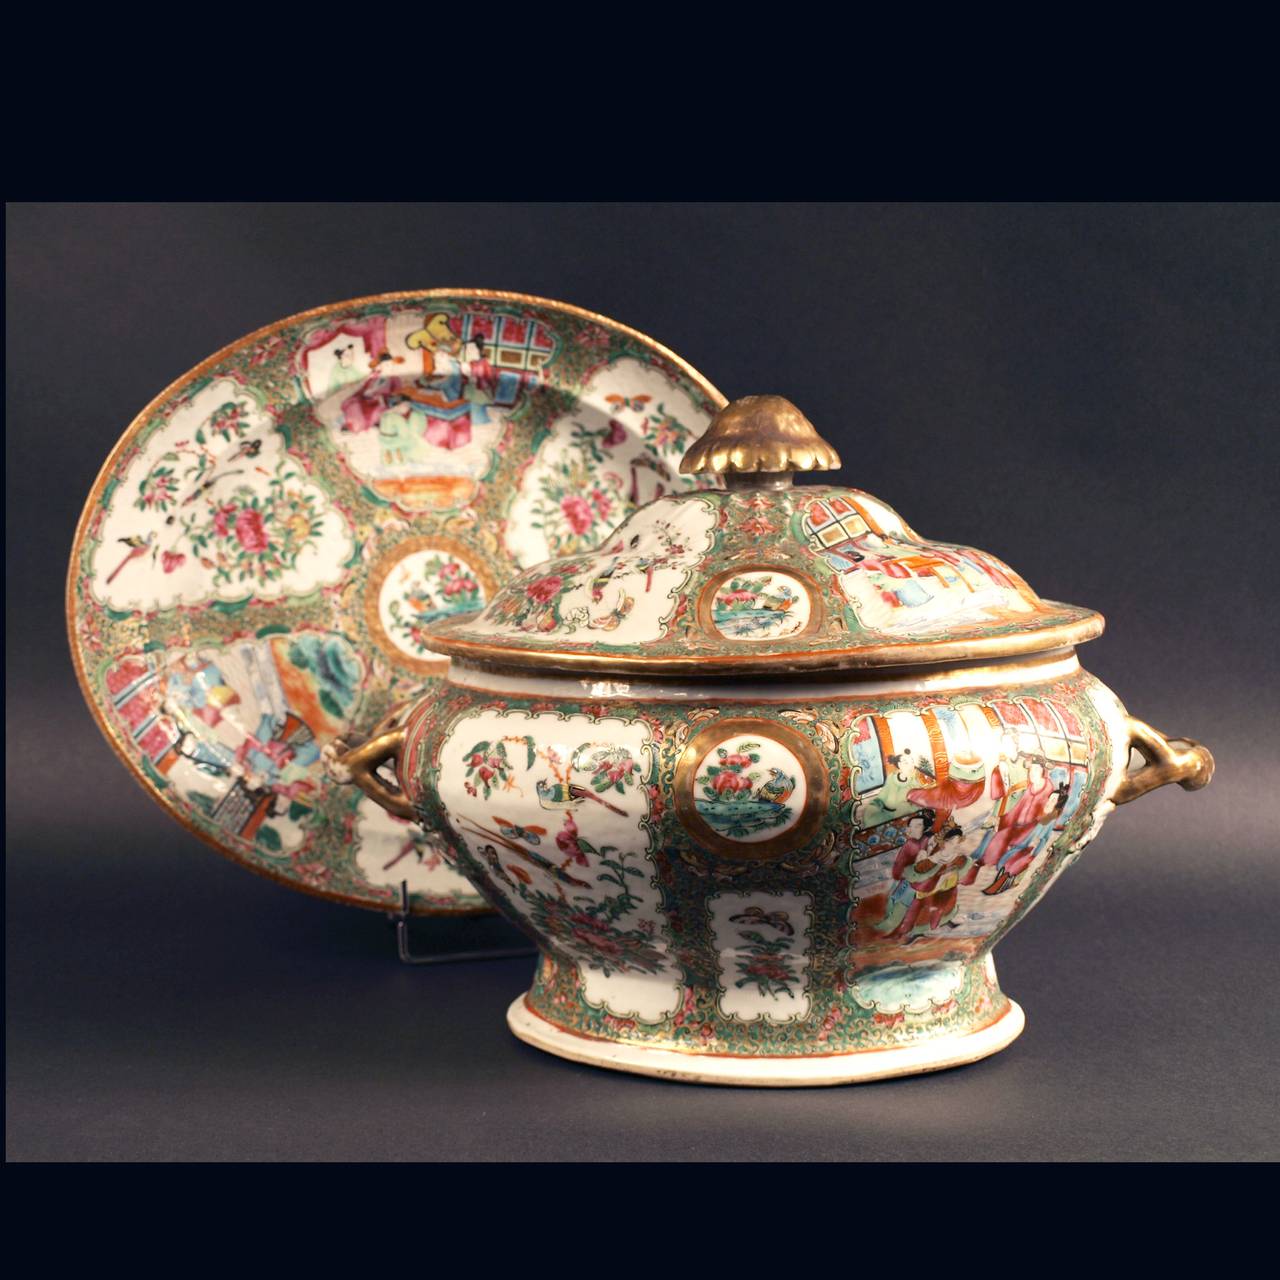 A Chinese export Canton rose Medallion  soup tureen, cover and stand, 19th century, decorated with figures in a landscape or birds and blossom within cartouches.
The tureen: 37 cm x 25cm x 25,5.
The stand: 36cm x 29,5 x 6 cm.
China for export